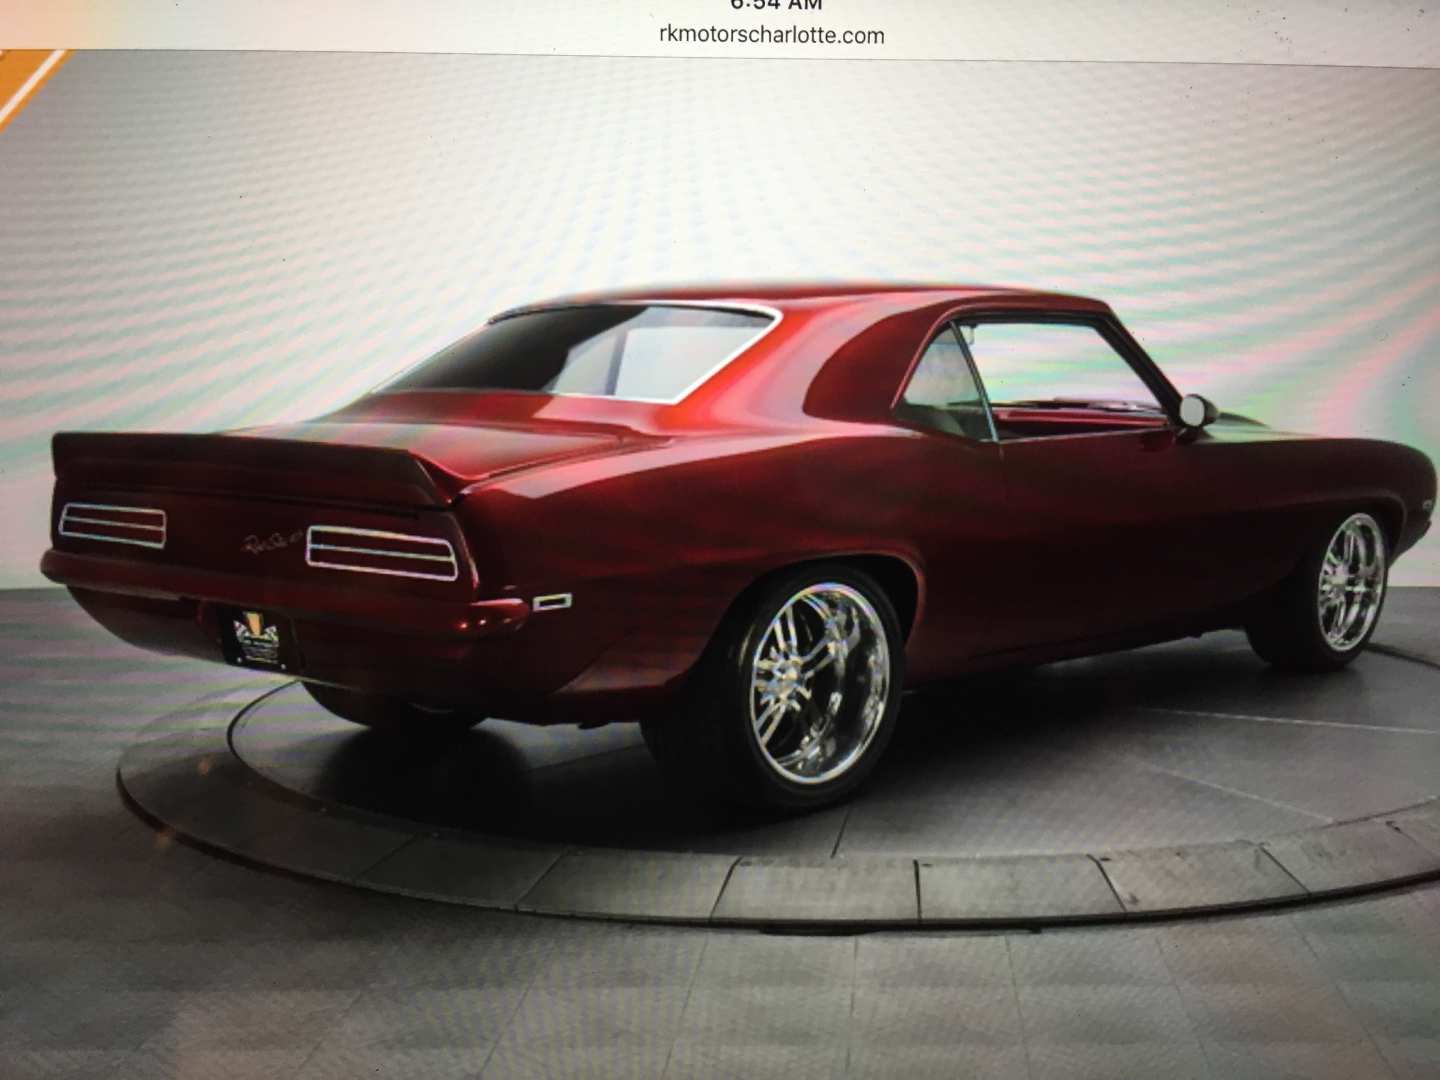 4th Image of a 1969 CHEVROLET CAMARO SS